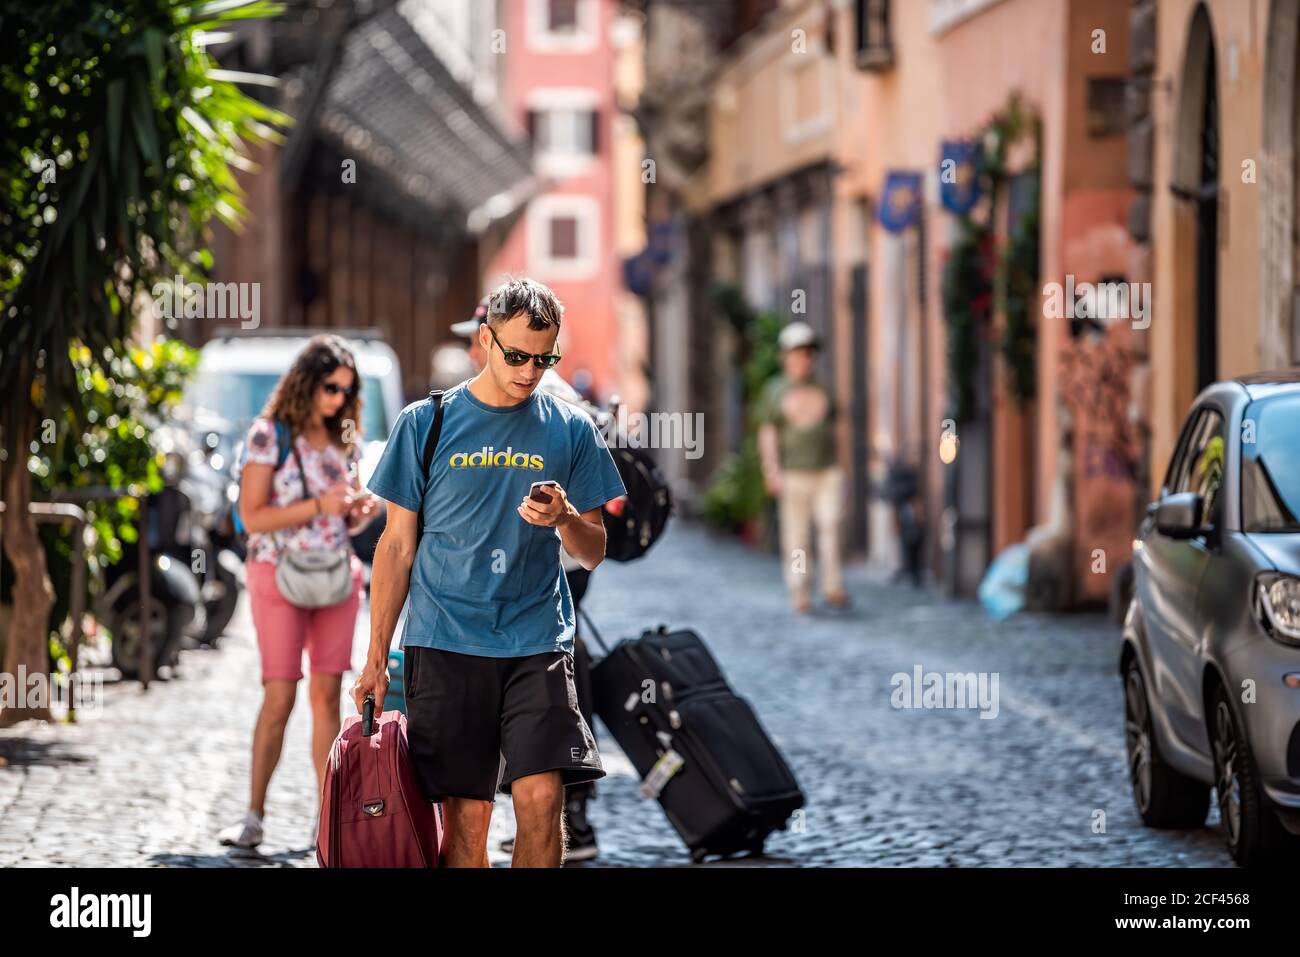 Rome, Italy - September 4, 2018: Narrow city town street with people family  walking carrying luggage searching on phone for hotel Stock Photo - Alamy